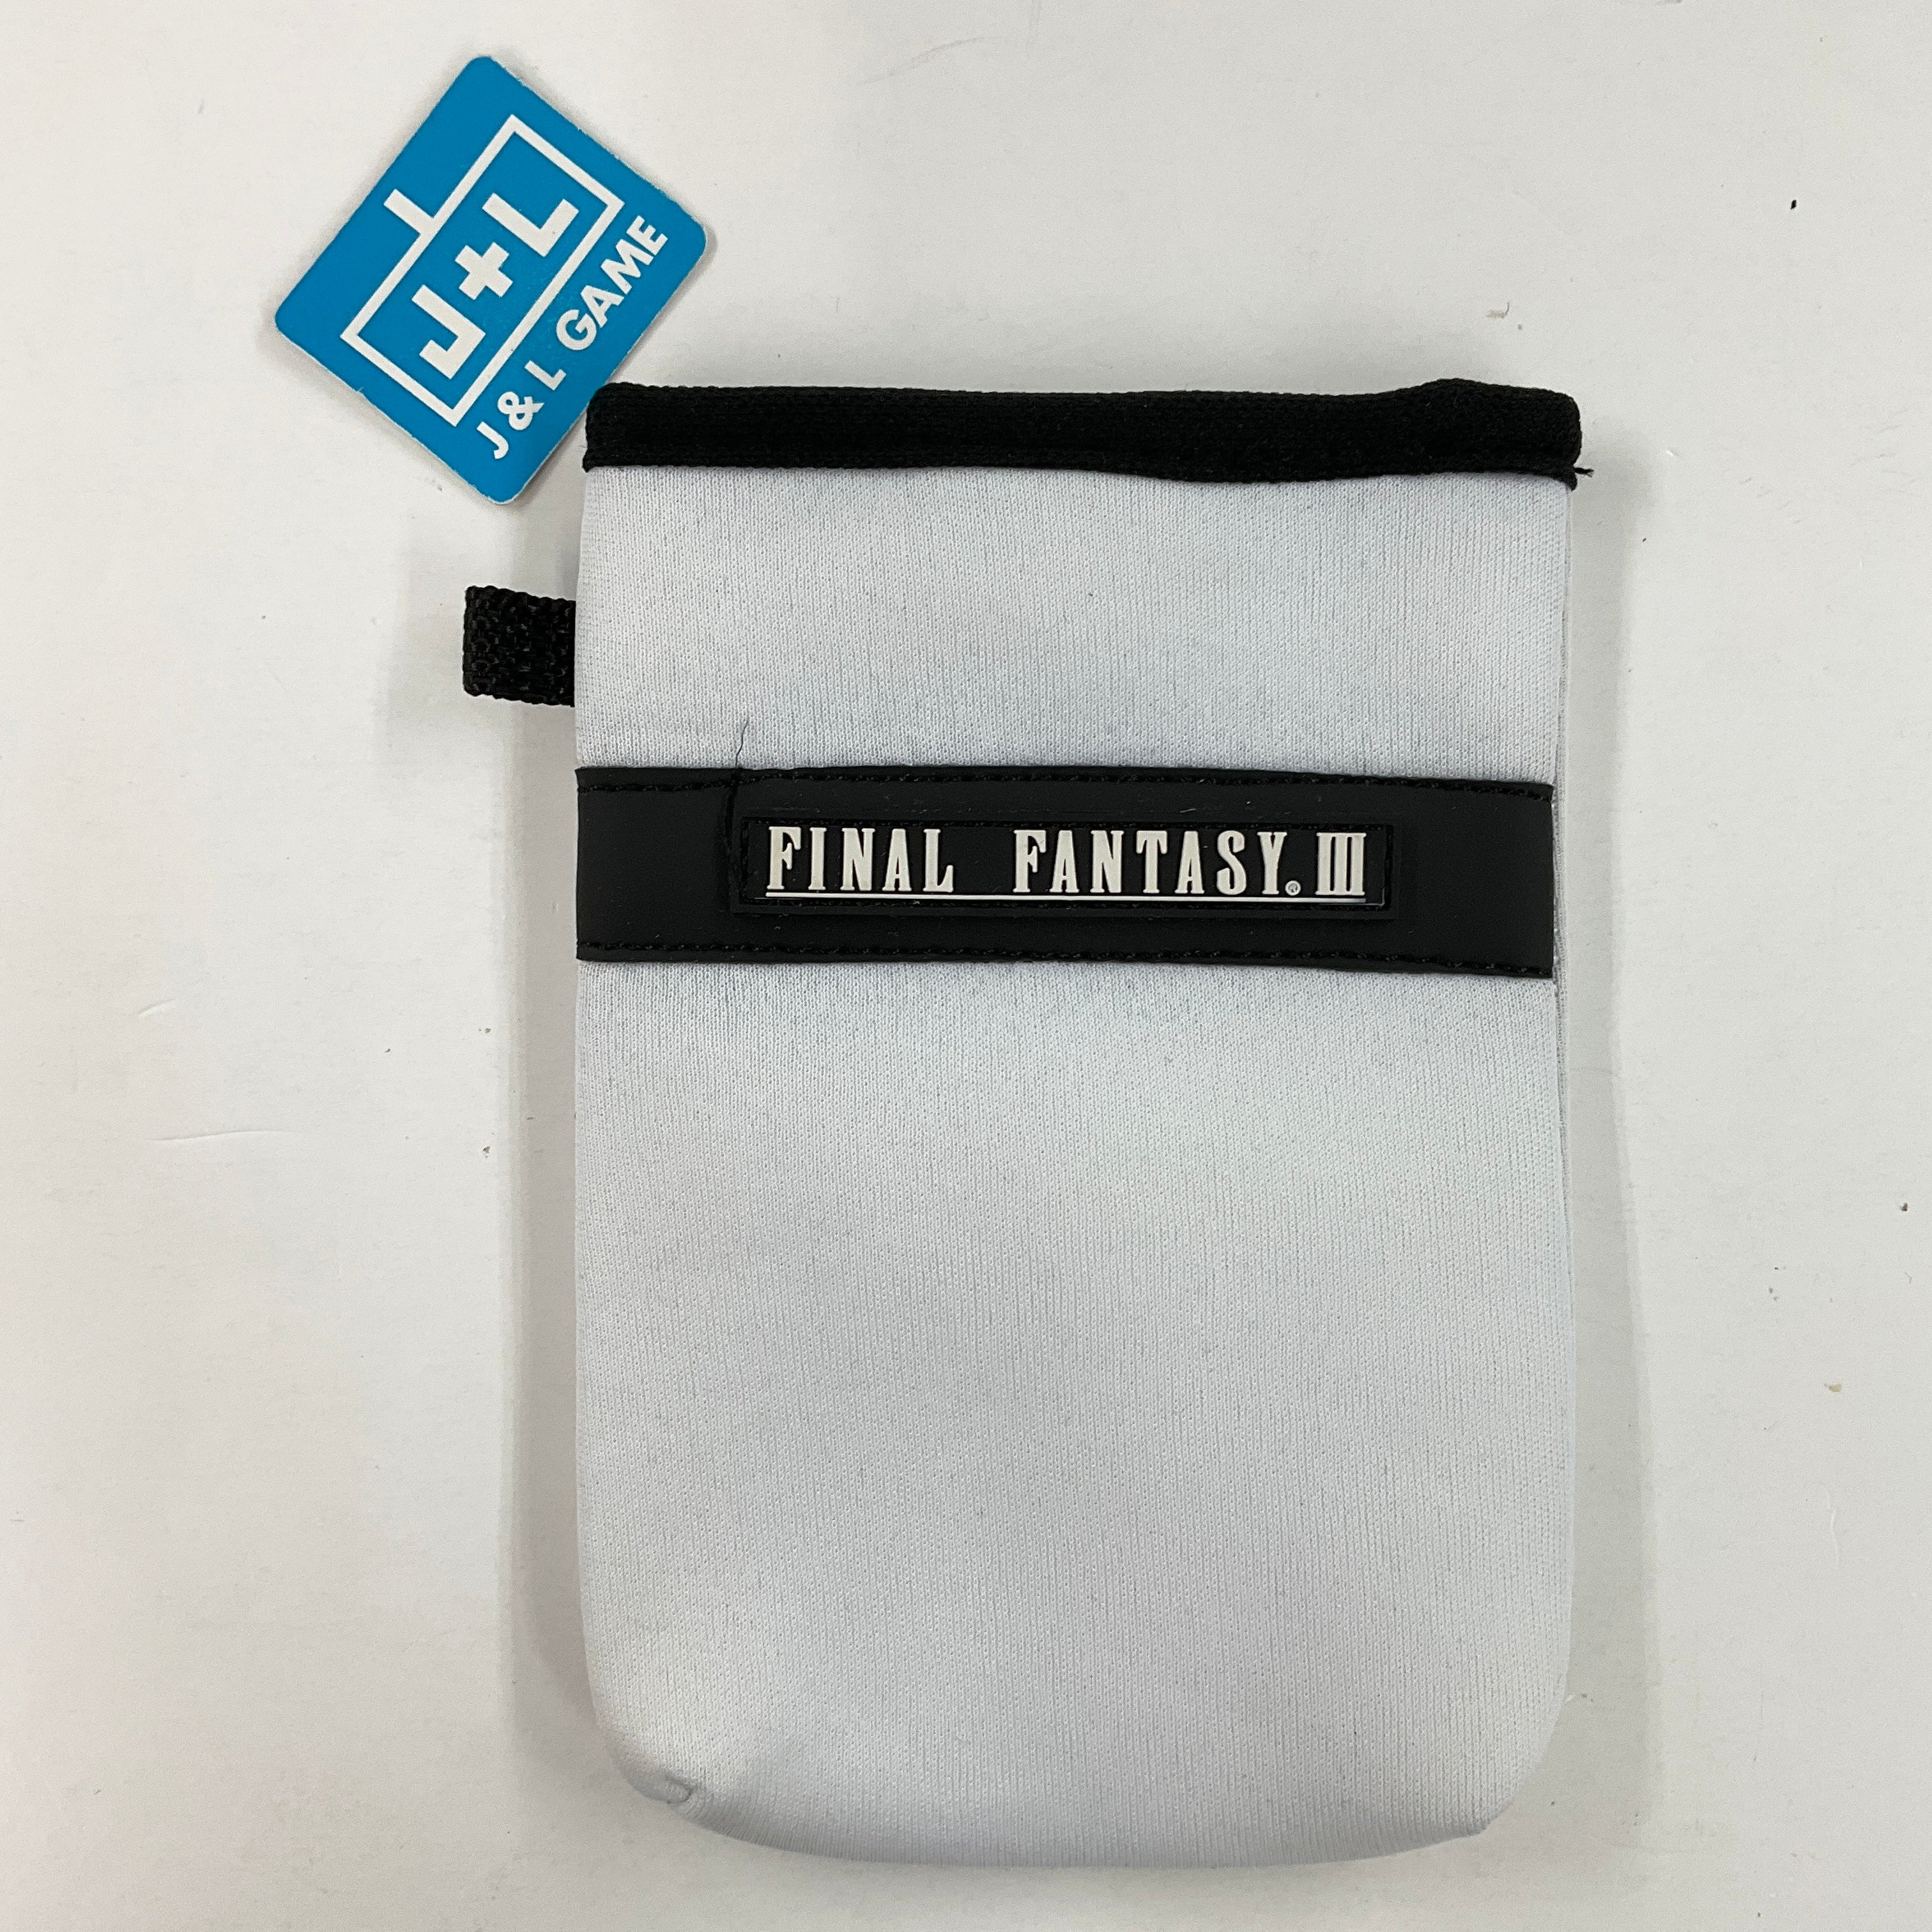 Nintendo DS Lite Final Fantasy III Exclusive Carrying Case - (NDS) Nintendo DS Accessories Square Enix   